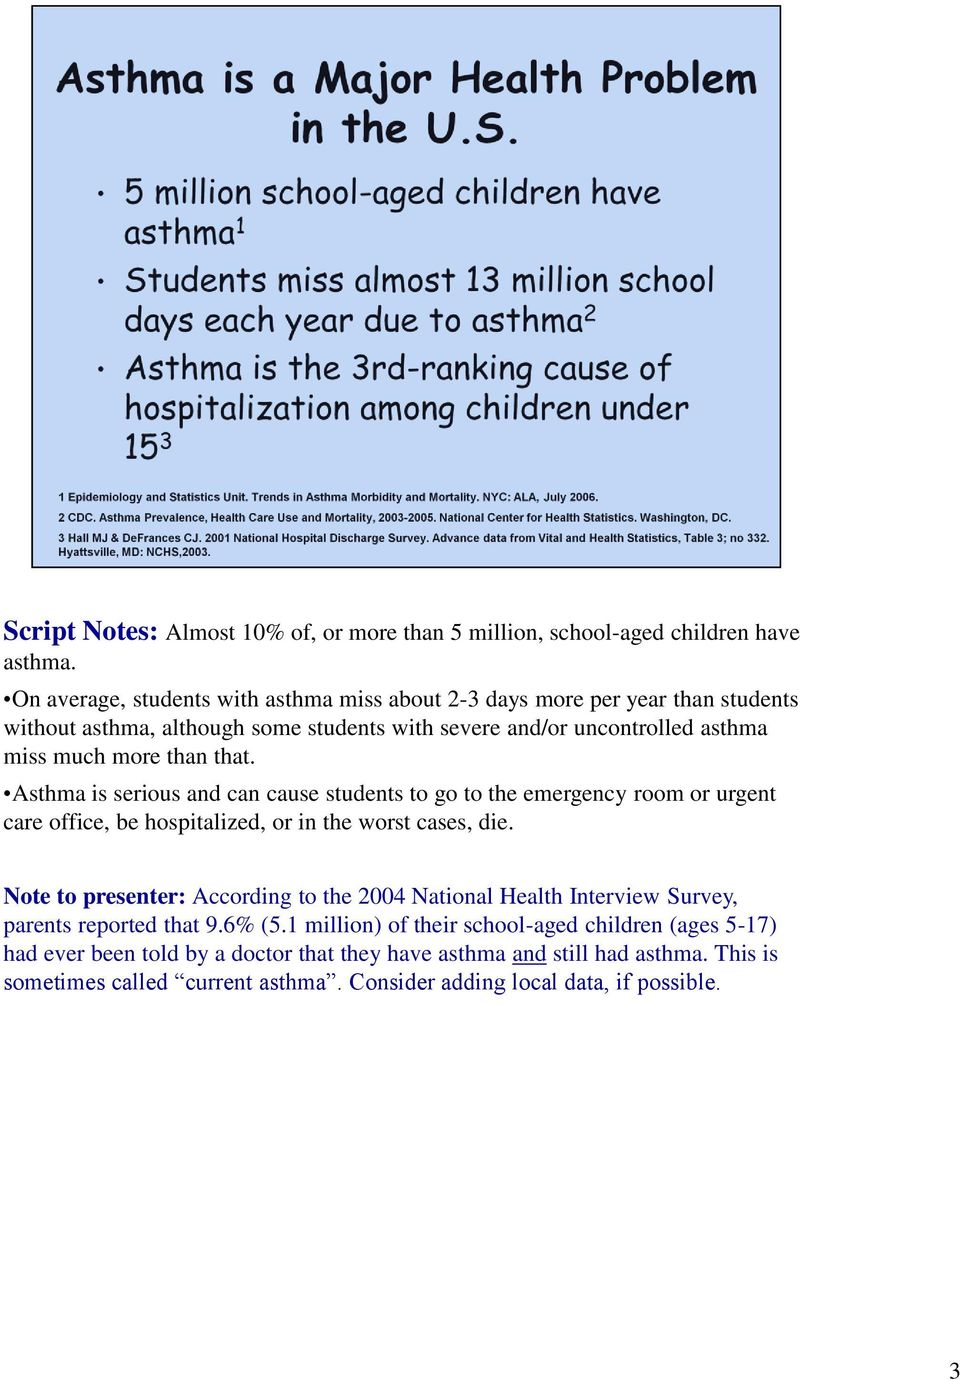 that. Asthma is serious and can cause students to go to the emergency room or urgent care office, be hospitalized, or in the worst cases, die.